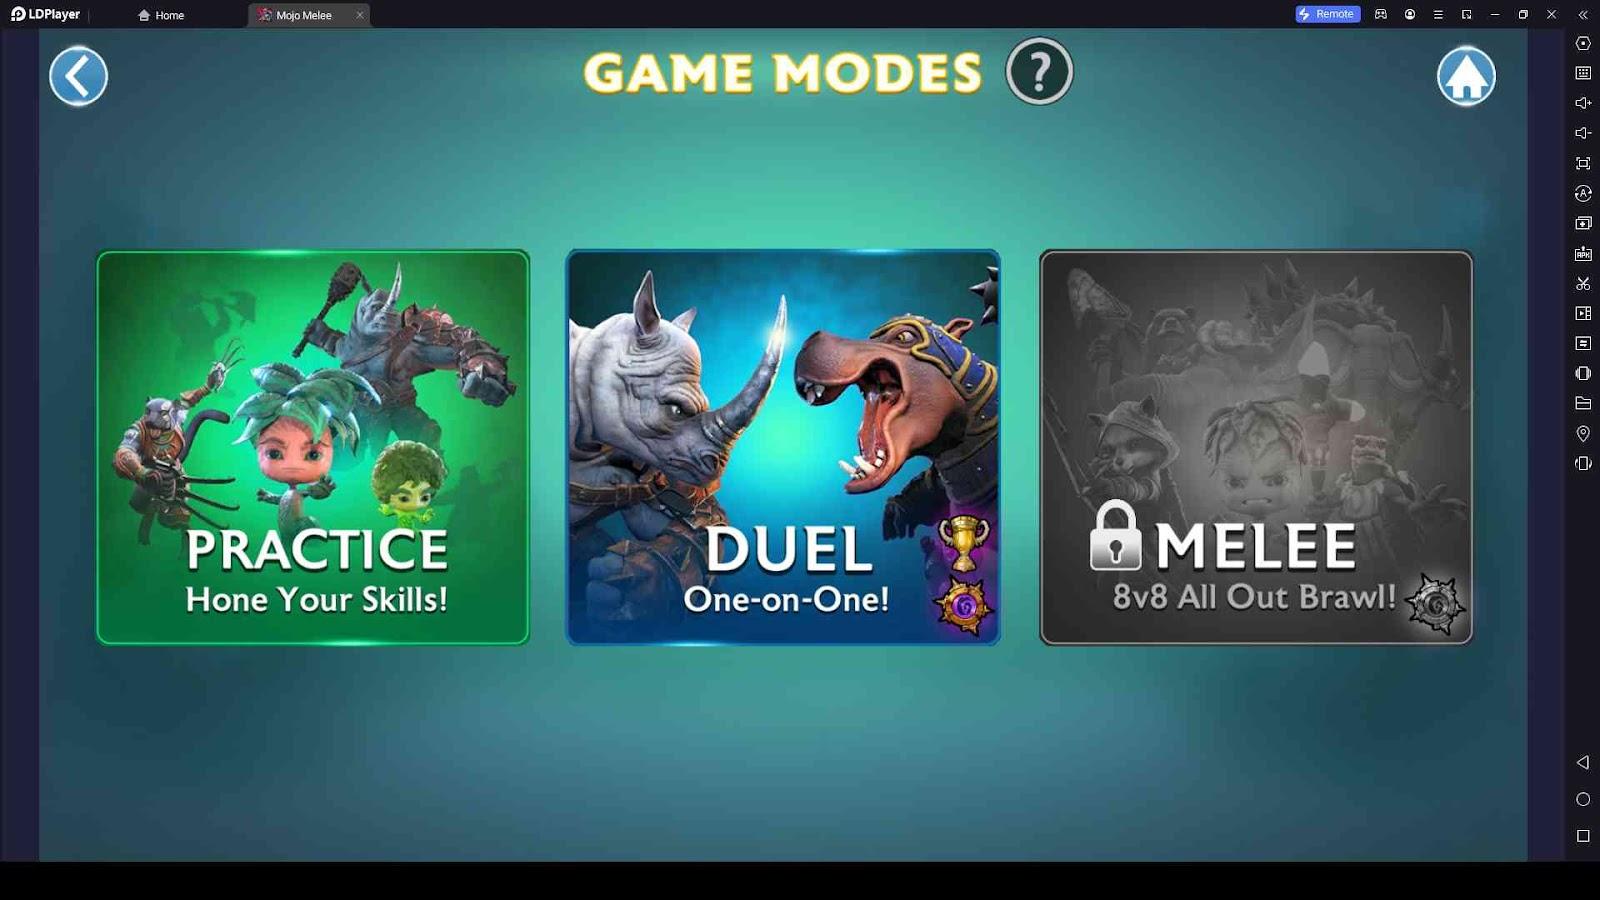 What Game Modes are there with Mojo Melee